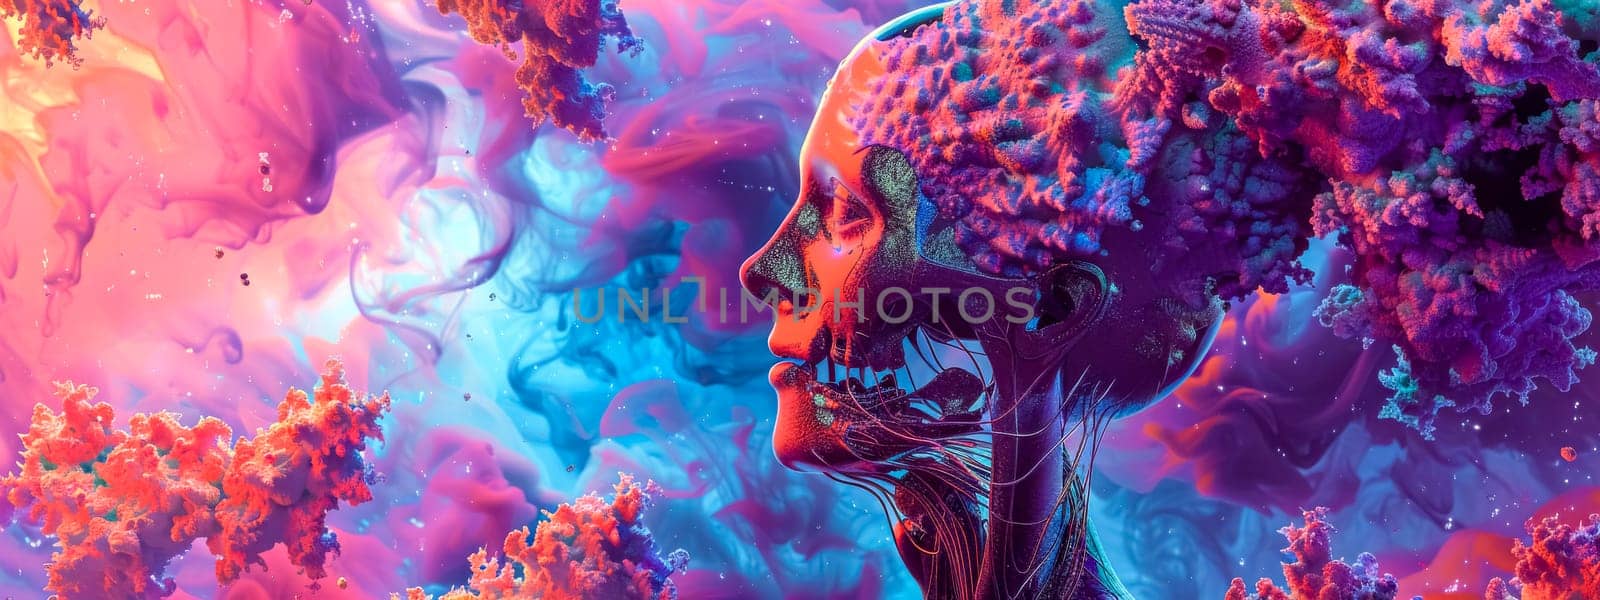 Vibrant digital art piece featuring a profile of a human head amidst abstract colorful nebulous forms